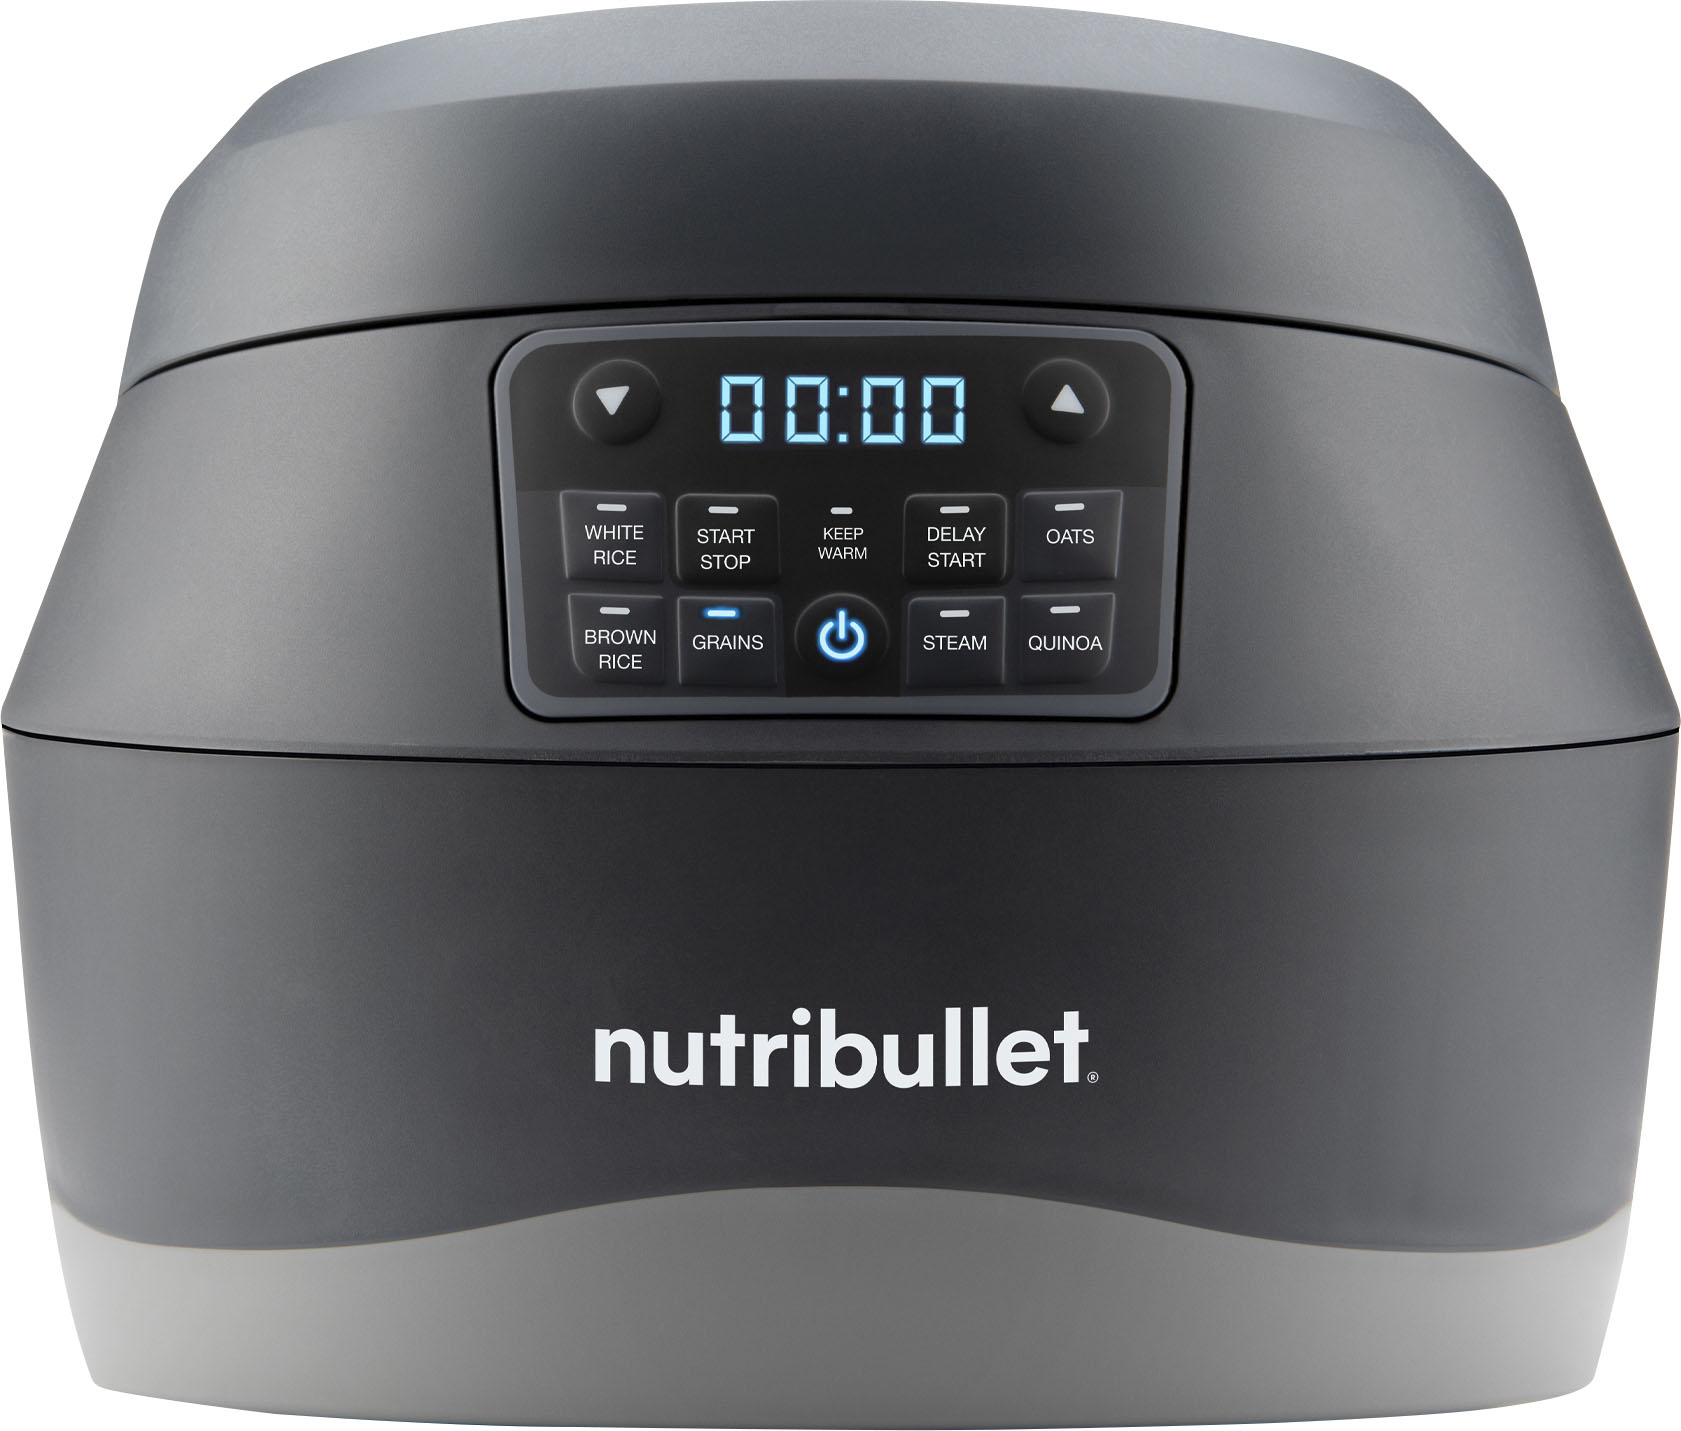 0818049026796 - NUTRIBULLET - EVERYGRAIN 10-CUP RICE AND GRAIN COOKER - GRAY